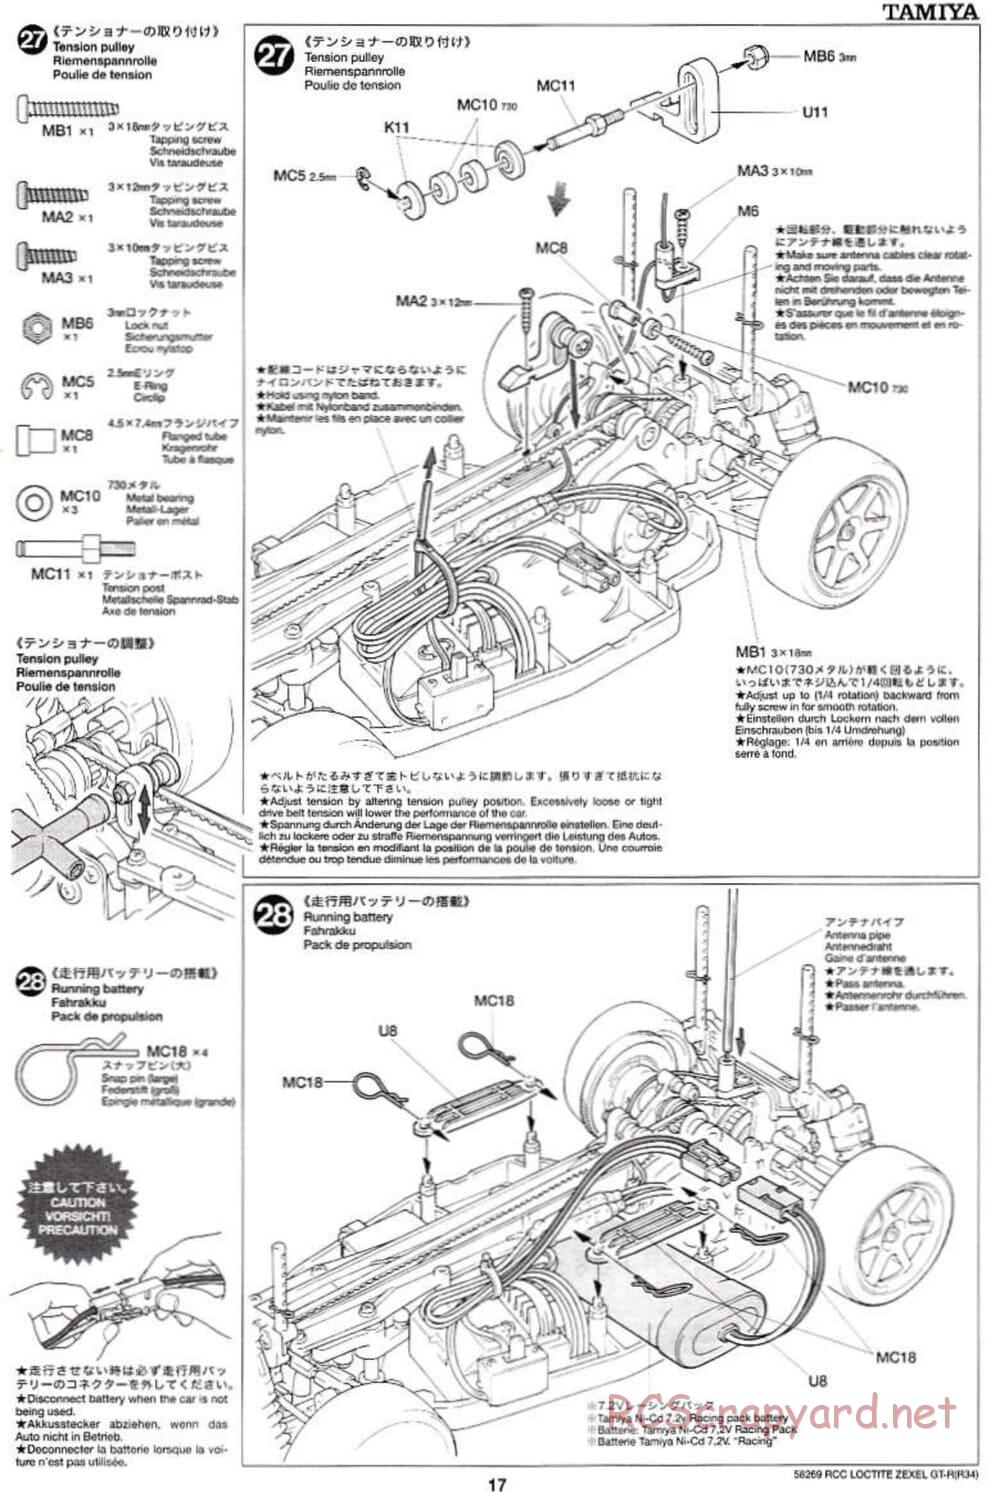 Tamiya - Loctite Zexel Skyline GT-R (R34) - TA-04 Chassis - Manual - Page 17